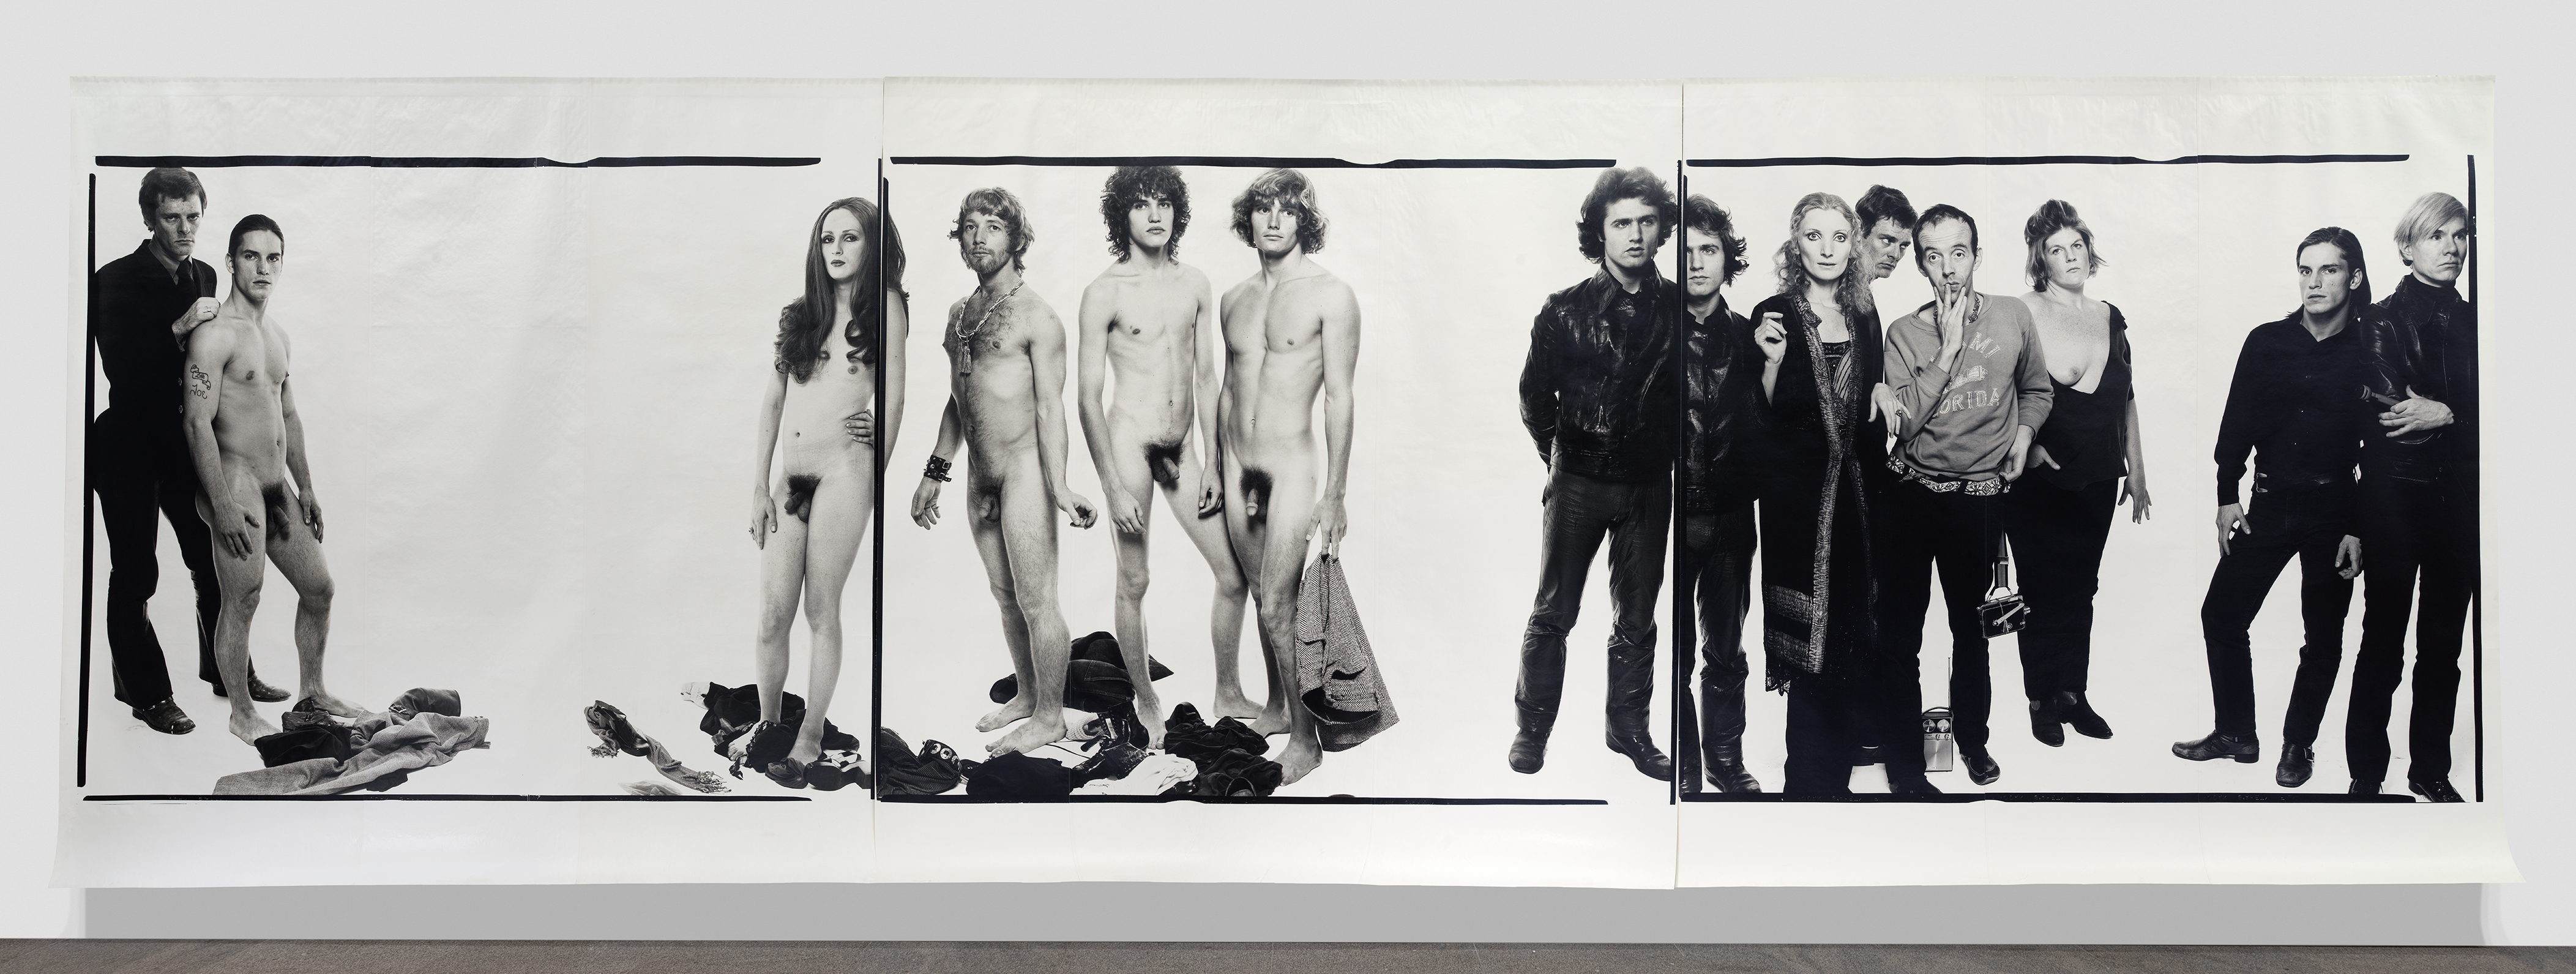 richard_avedon_andy_warhol_and_members_of_the_factory_new_york_october_30_1969_s.jpg